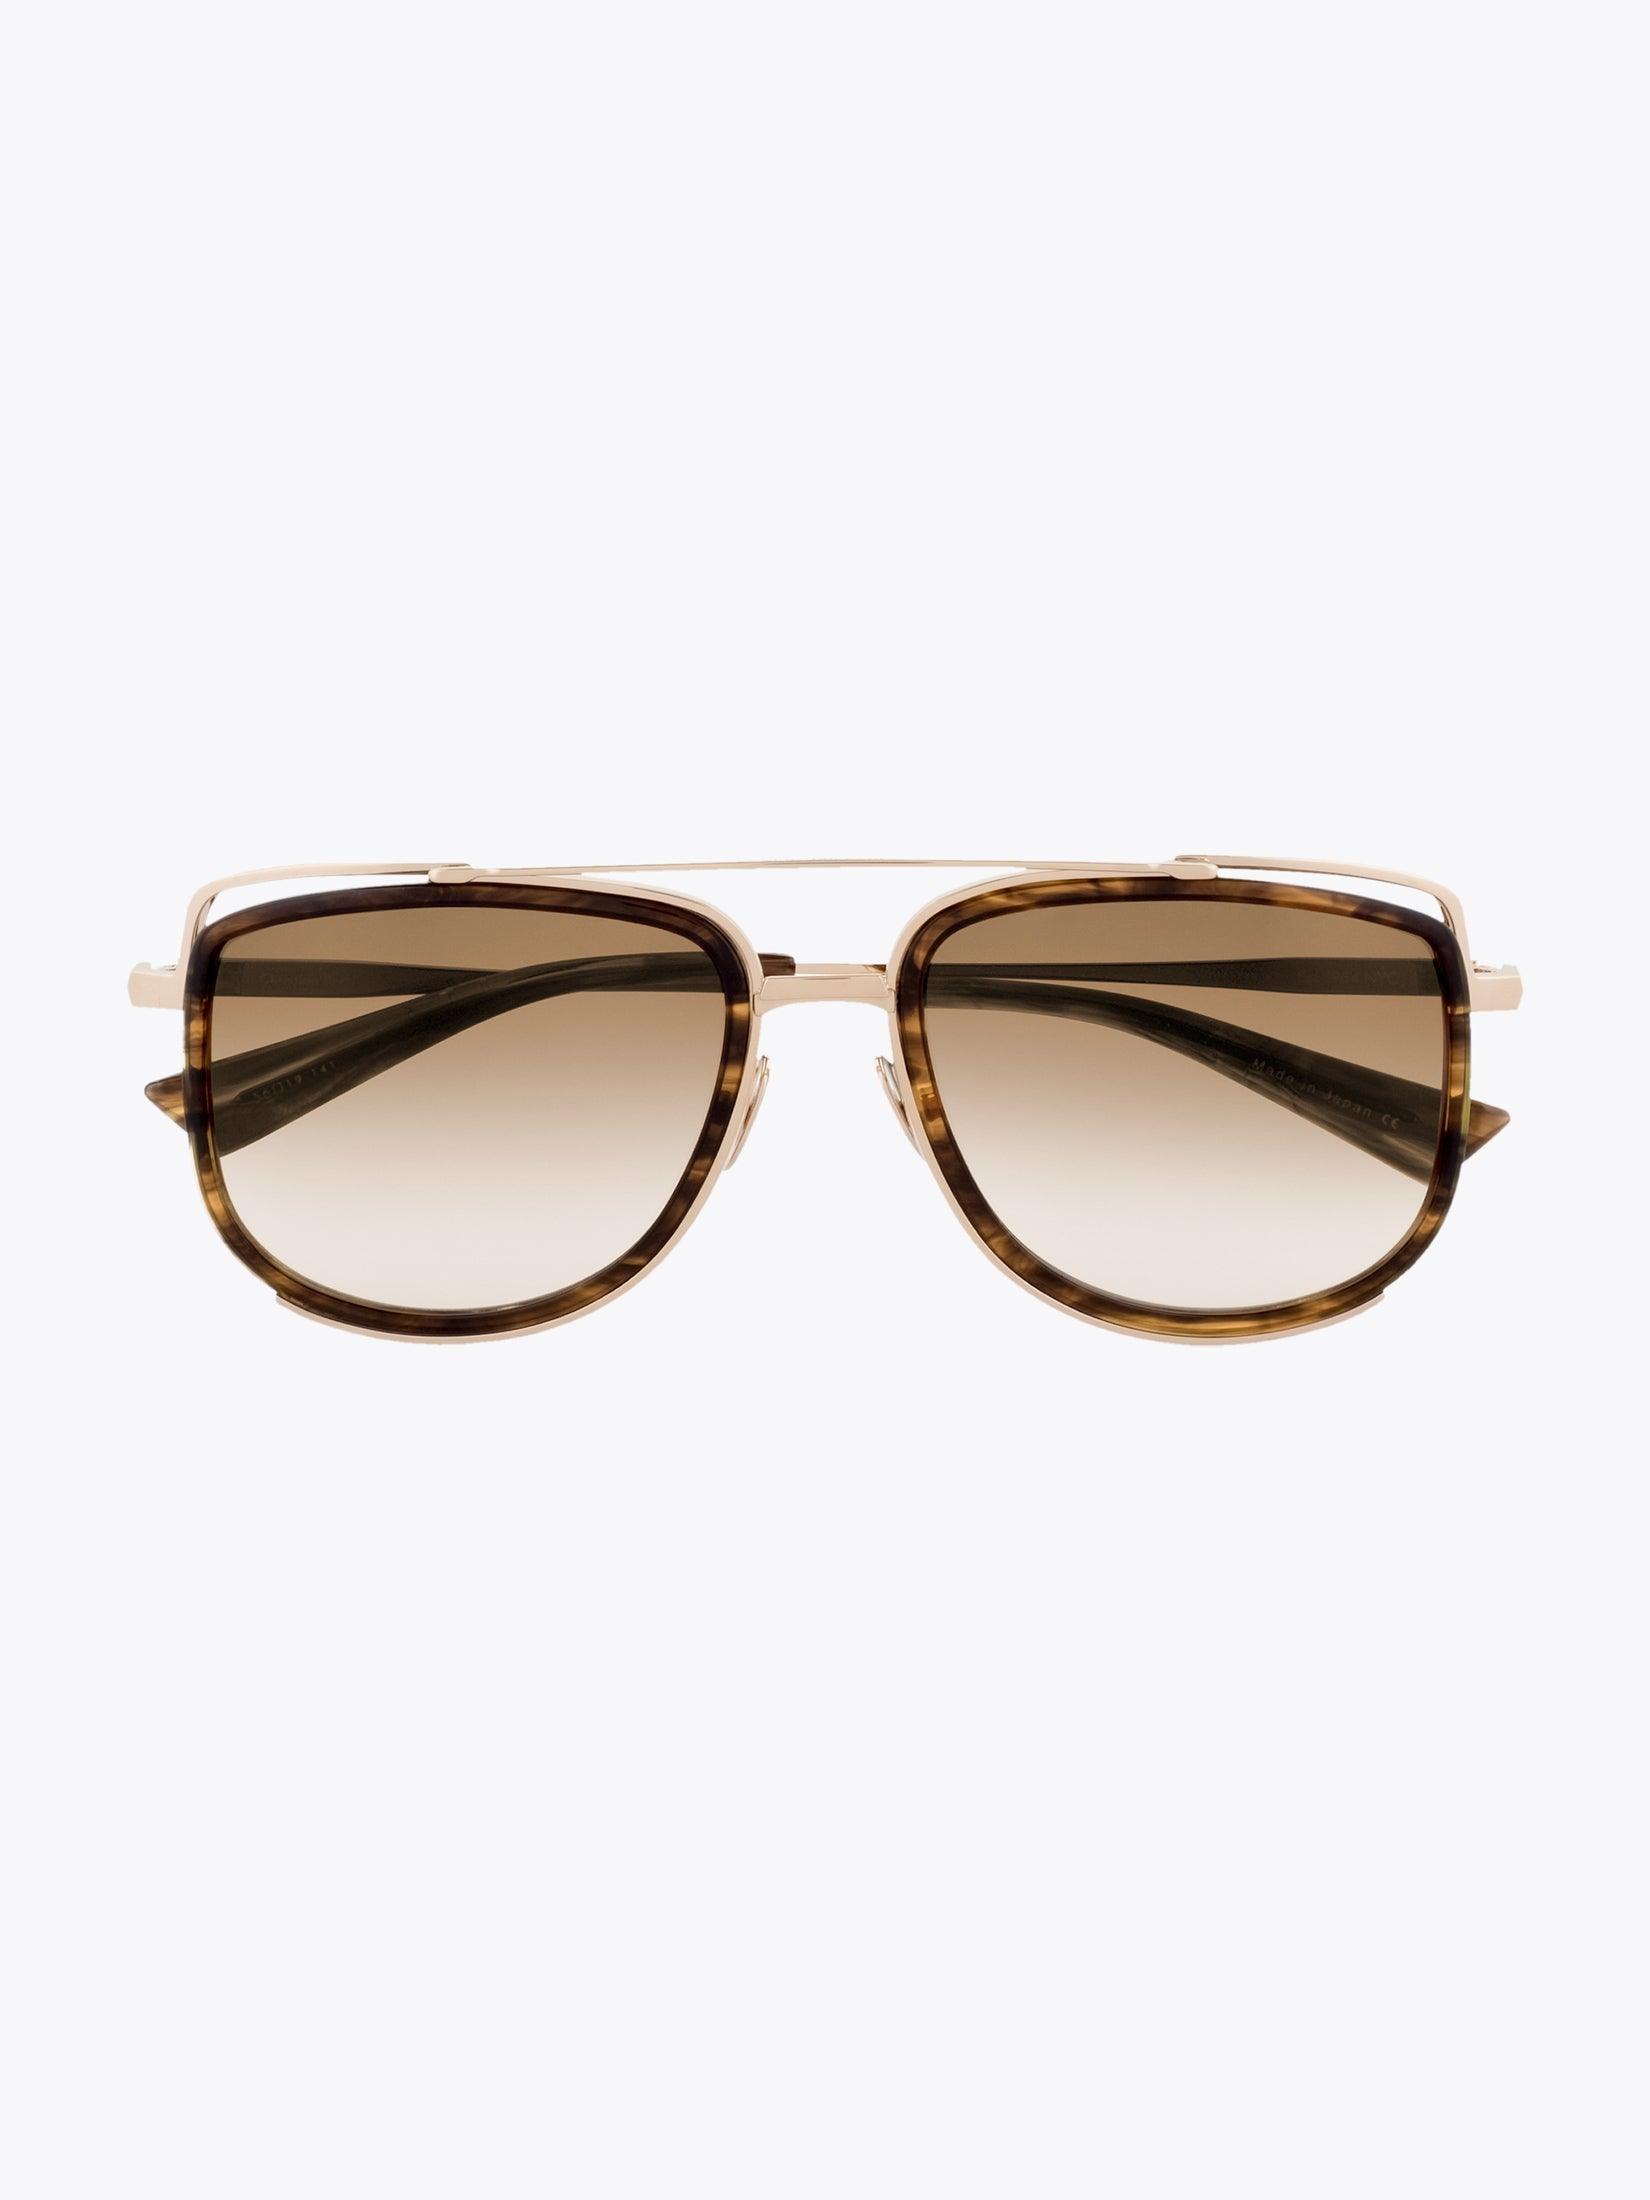 CHRISTIAN ROTH CR-100 Brown/Gold Sunglasses